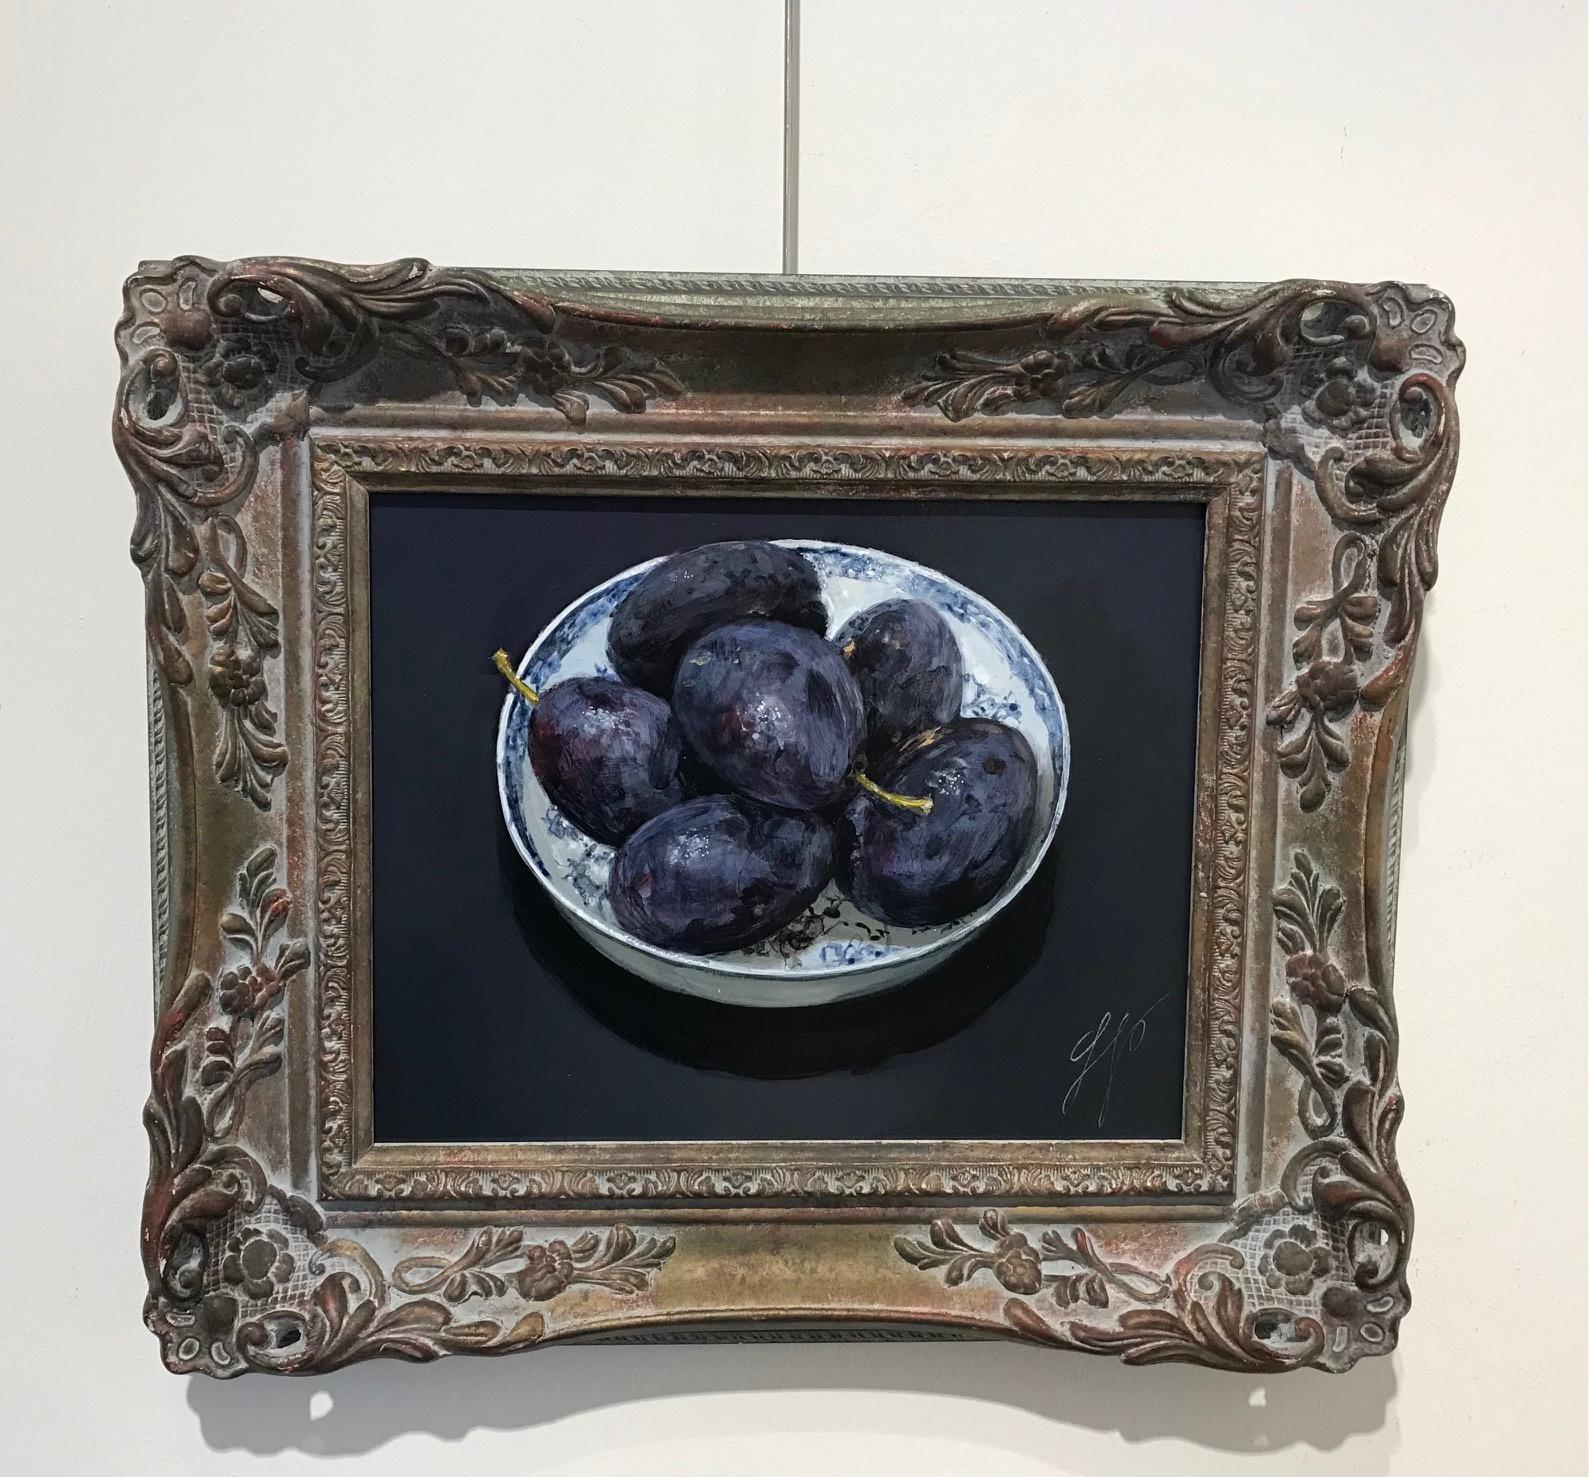 ''Plums'', Dutch Contemporary Dutch Still-Life with Porcelain and Blue Plums - White Still-Life Painting by Sasja Wagenaar